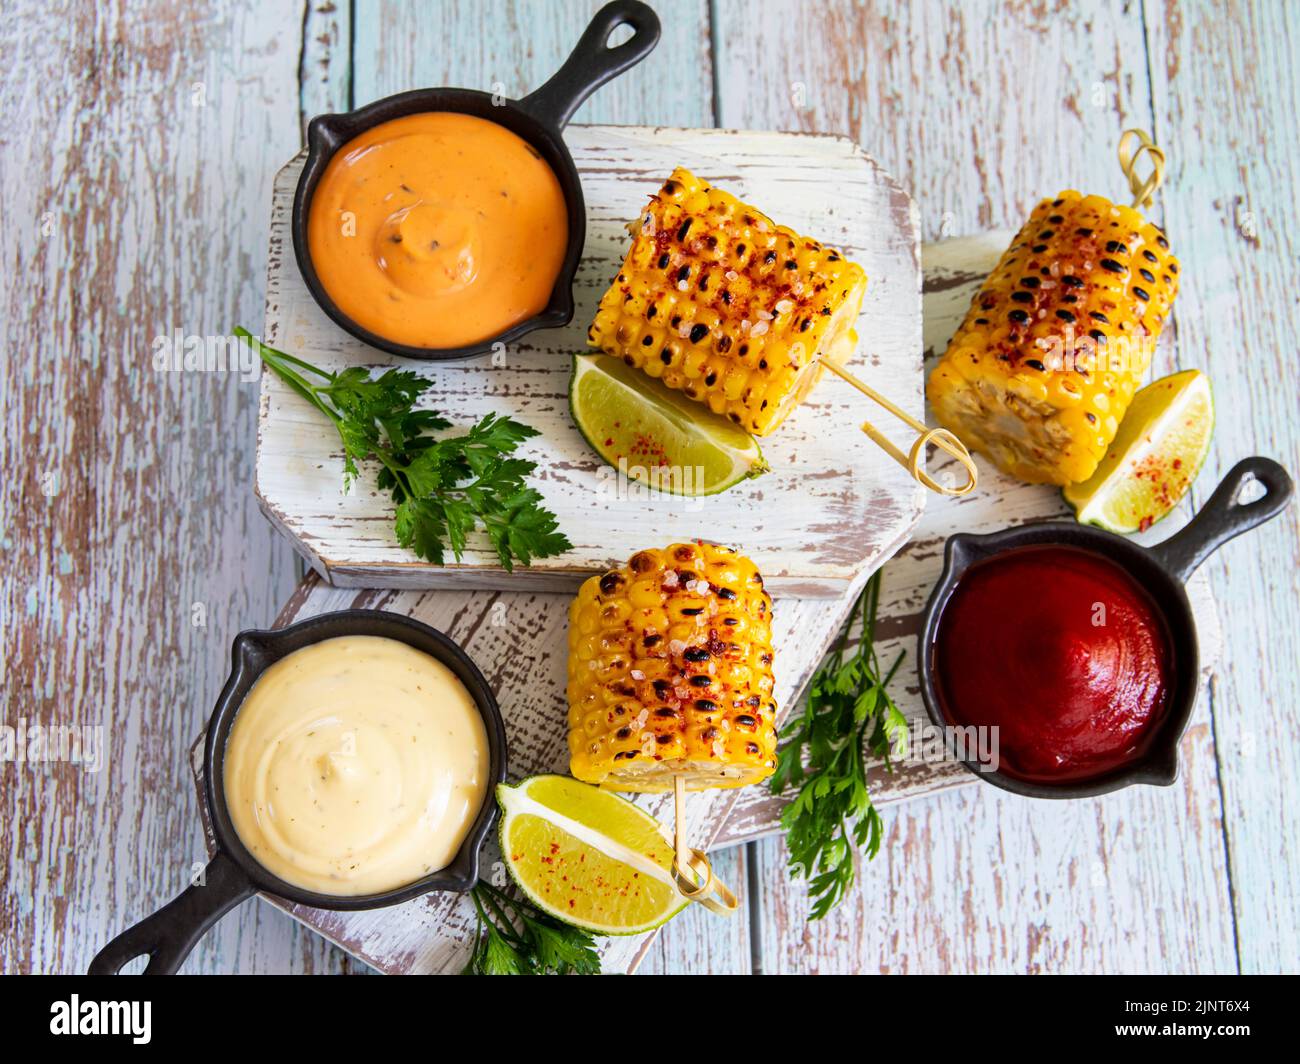 grilled yellow corn with spices lime white red orange sauce portion top view Stock Photo